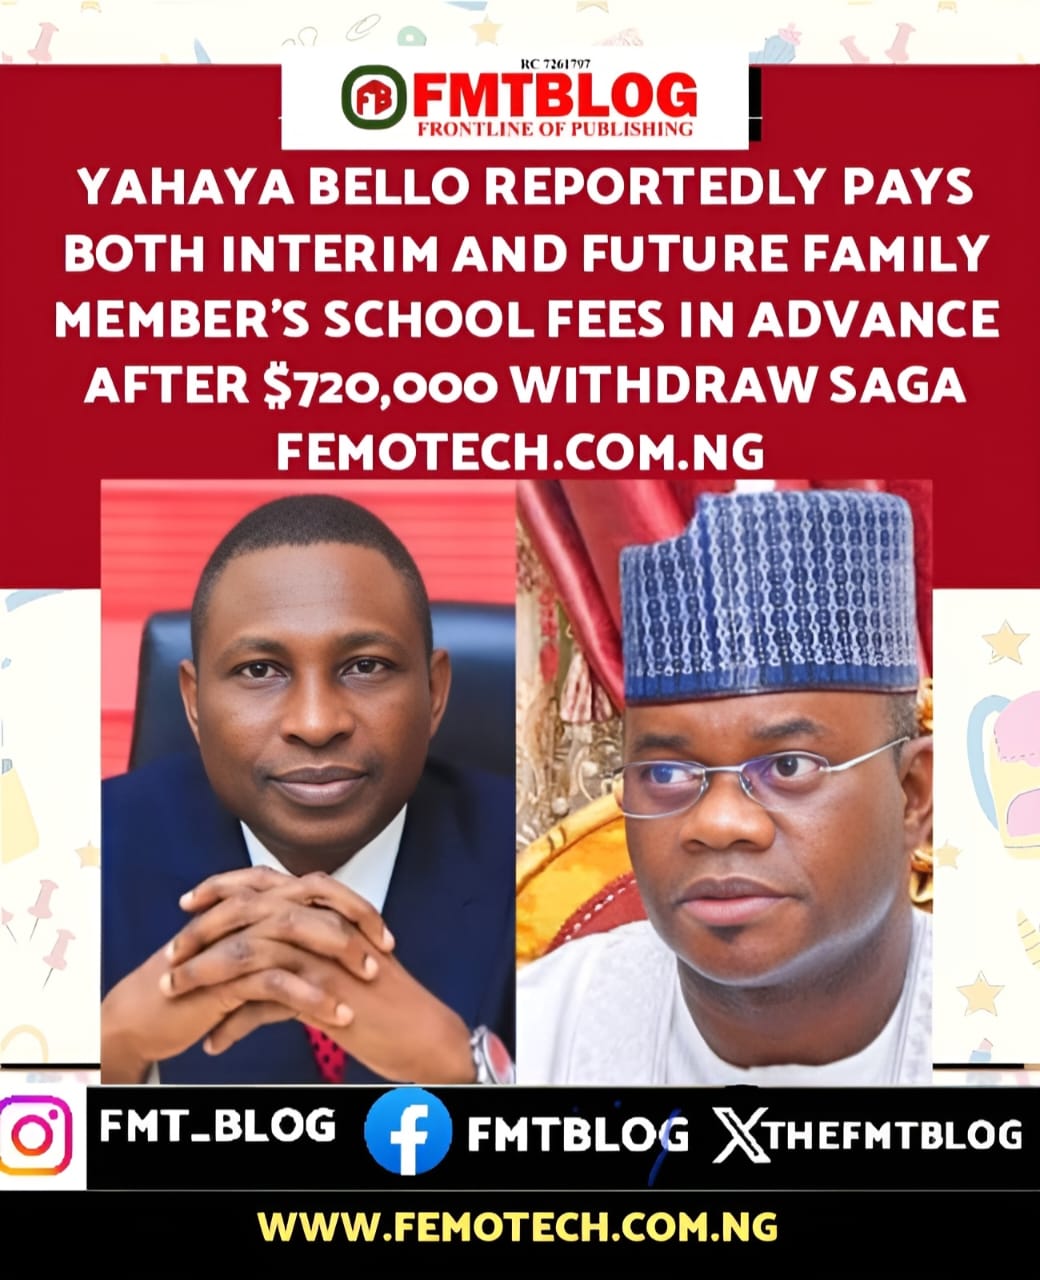 Yahaya Bello Reportedly Pays Both Interim And Future Family Member’s School Fees In Advance After $720,000 Withdraw Saga(Documents)